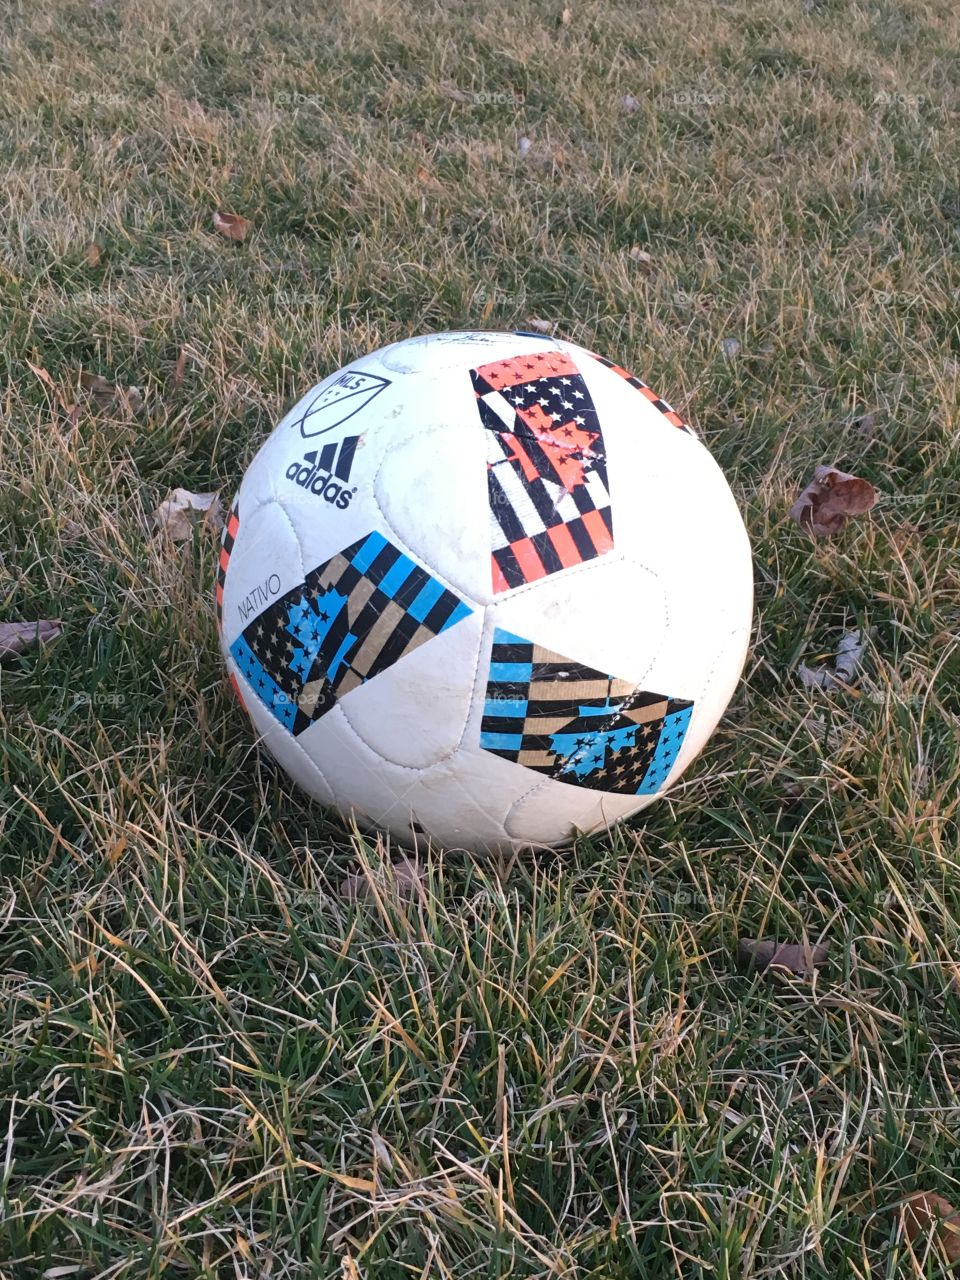 A worn, used soccer ball resting on grass.